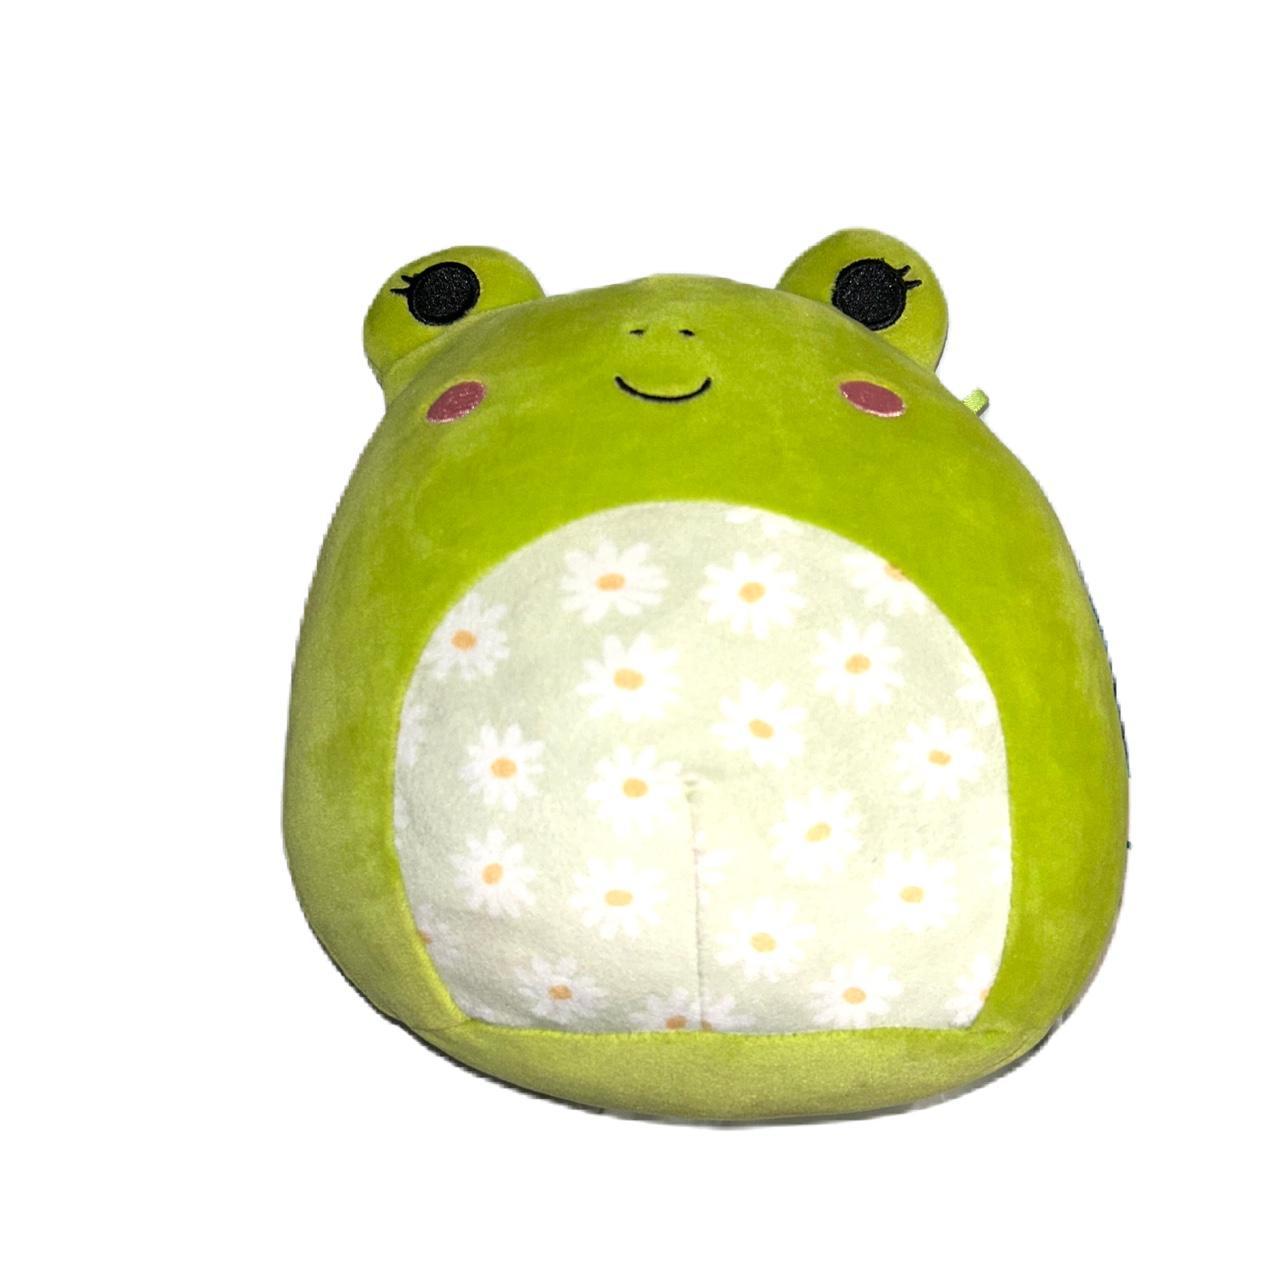 Very cute frog squishmallow 🐸 - Depop